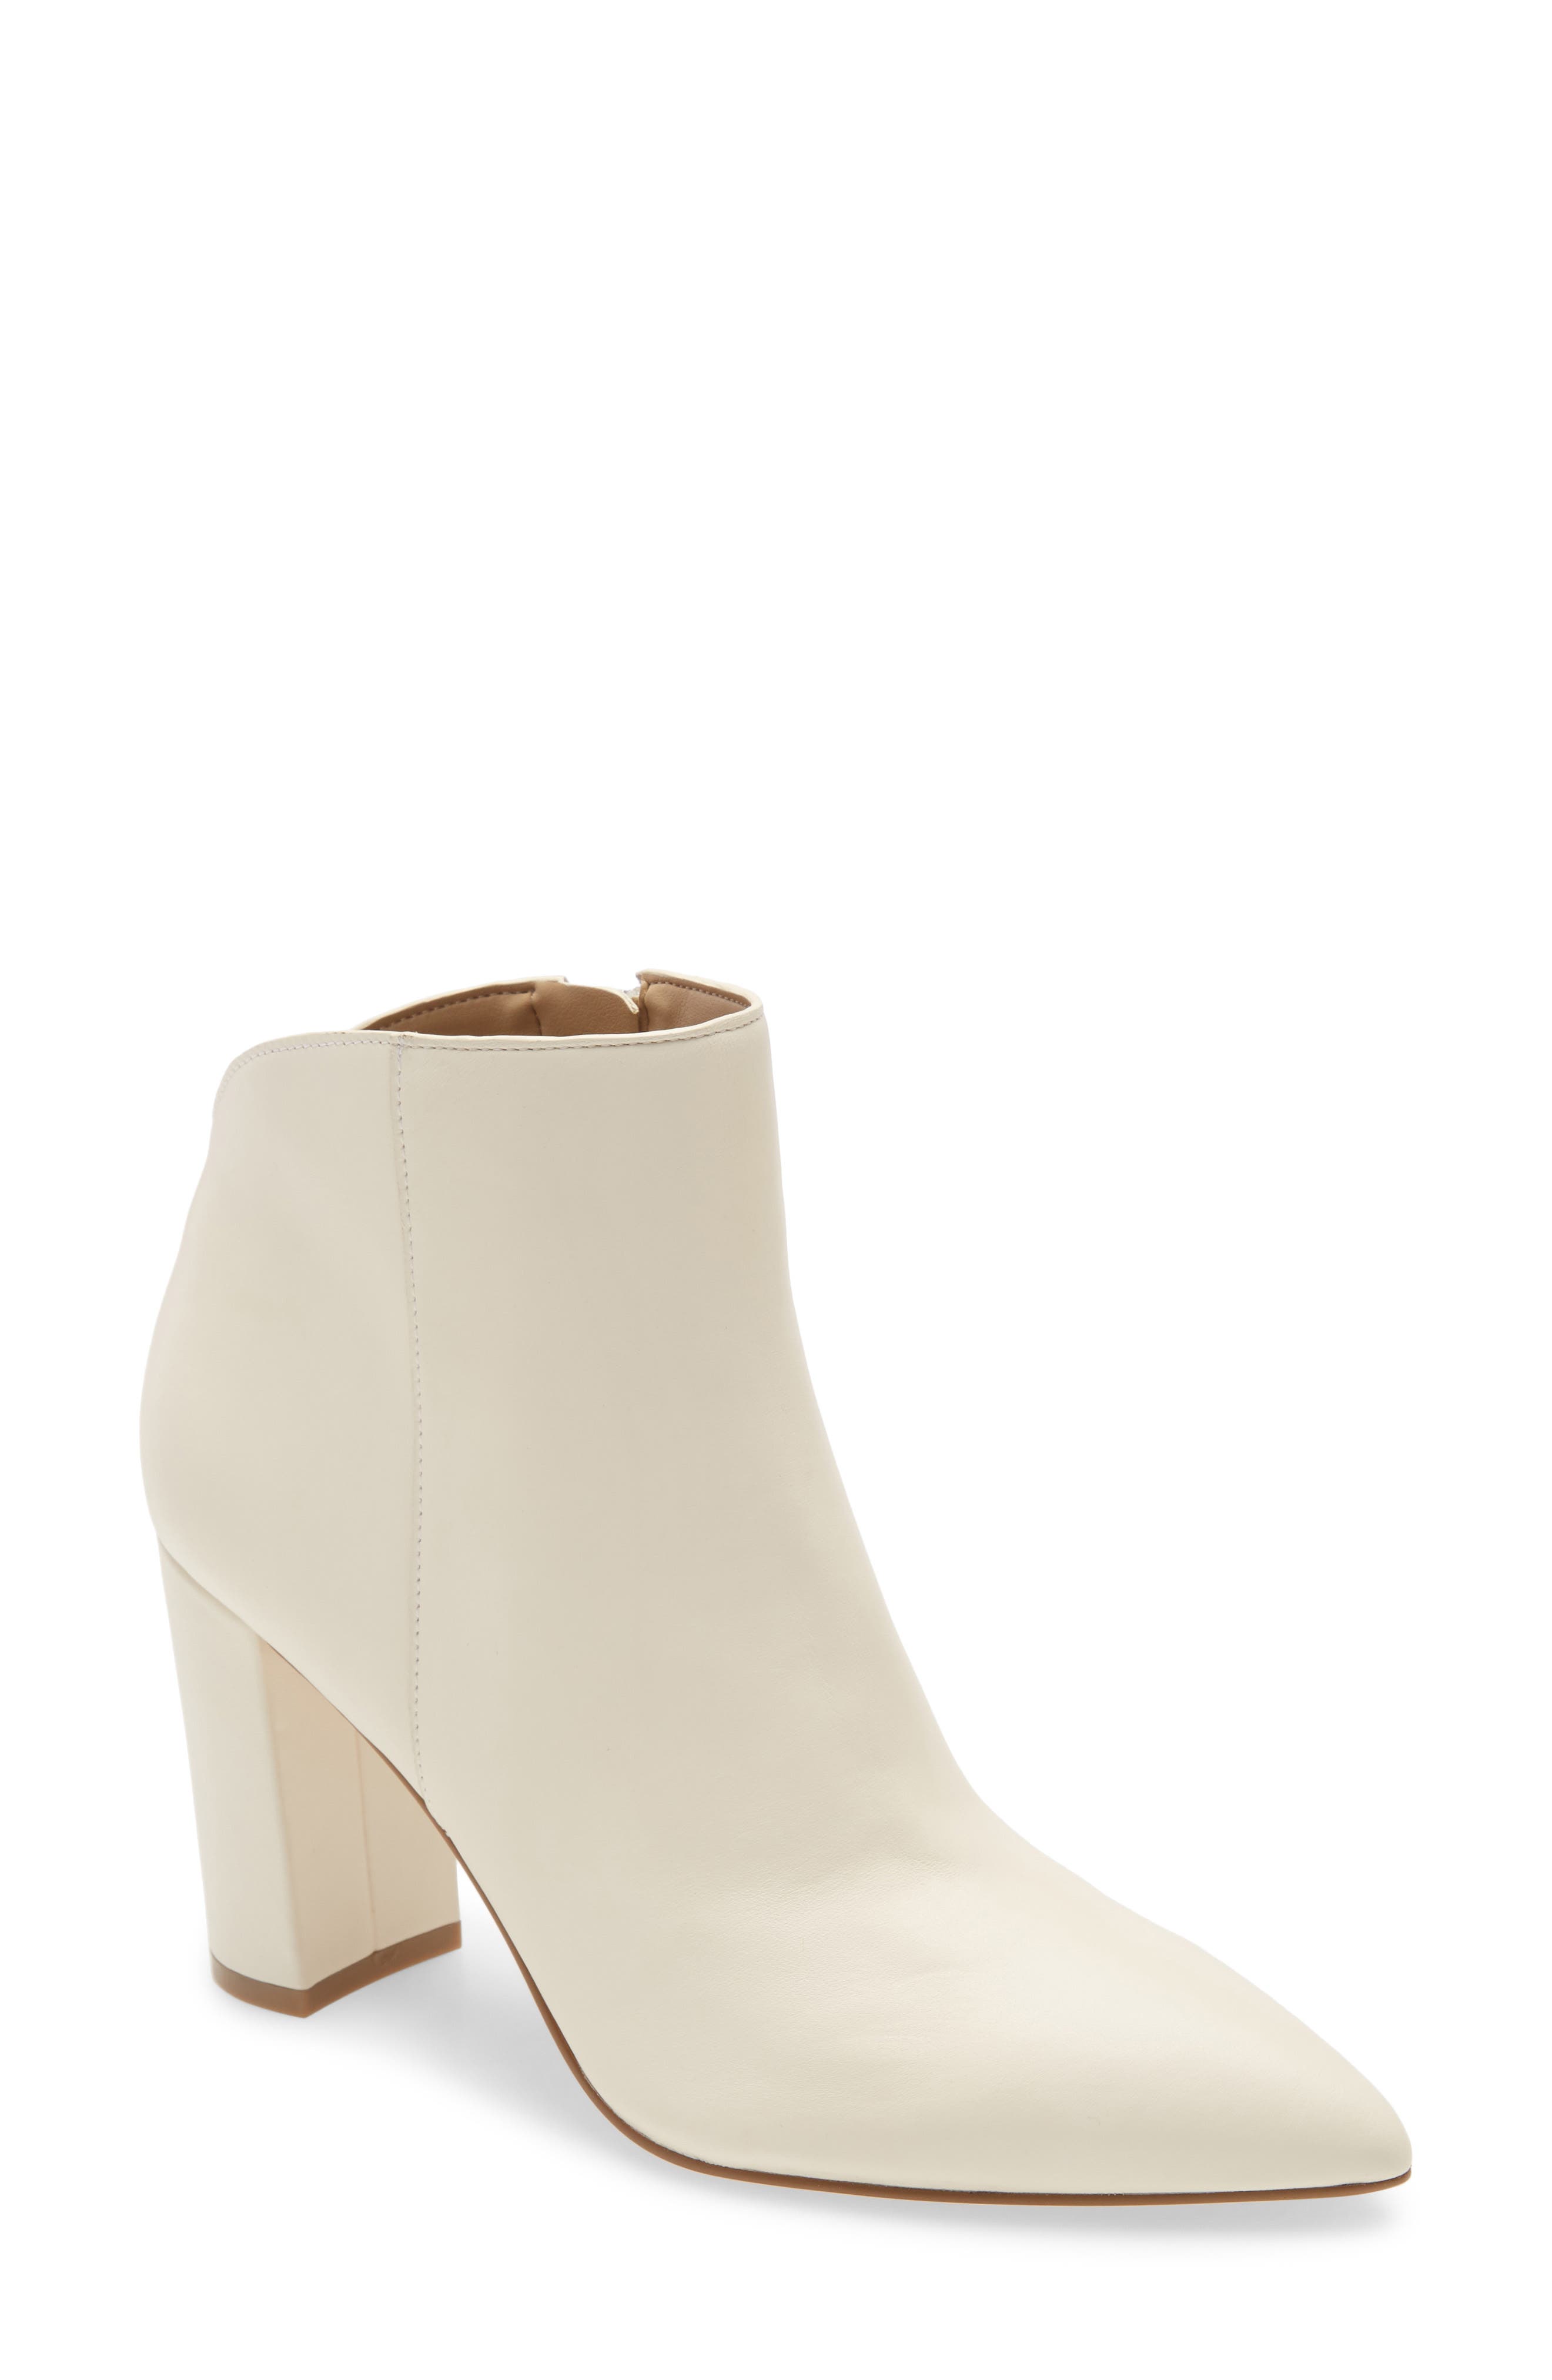 Marc Fisher Ltd Unno Pointed Toe Bootie In Ivory Leather | ModeSens